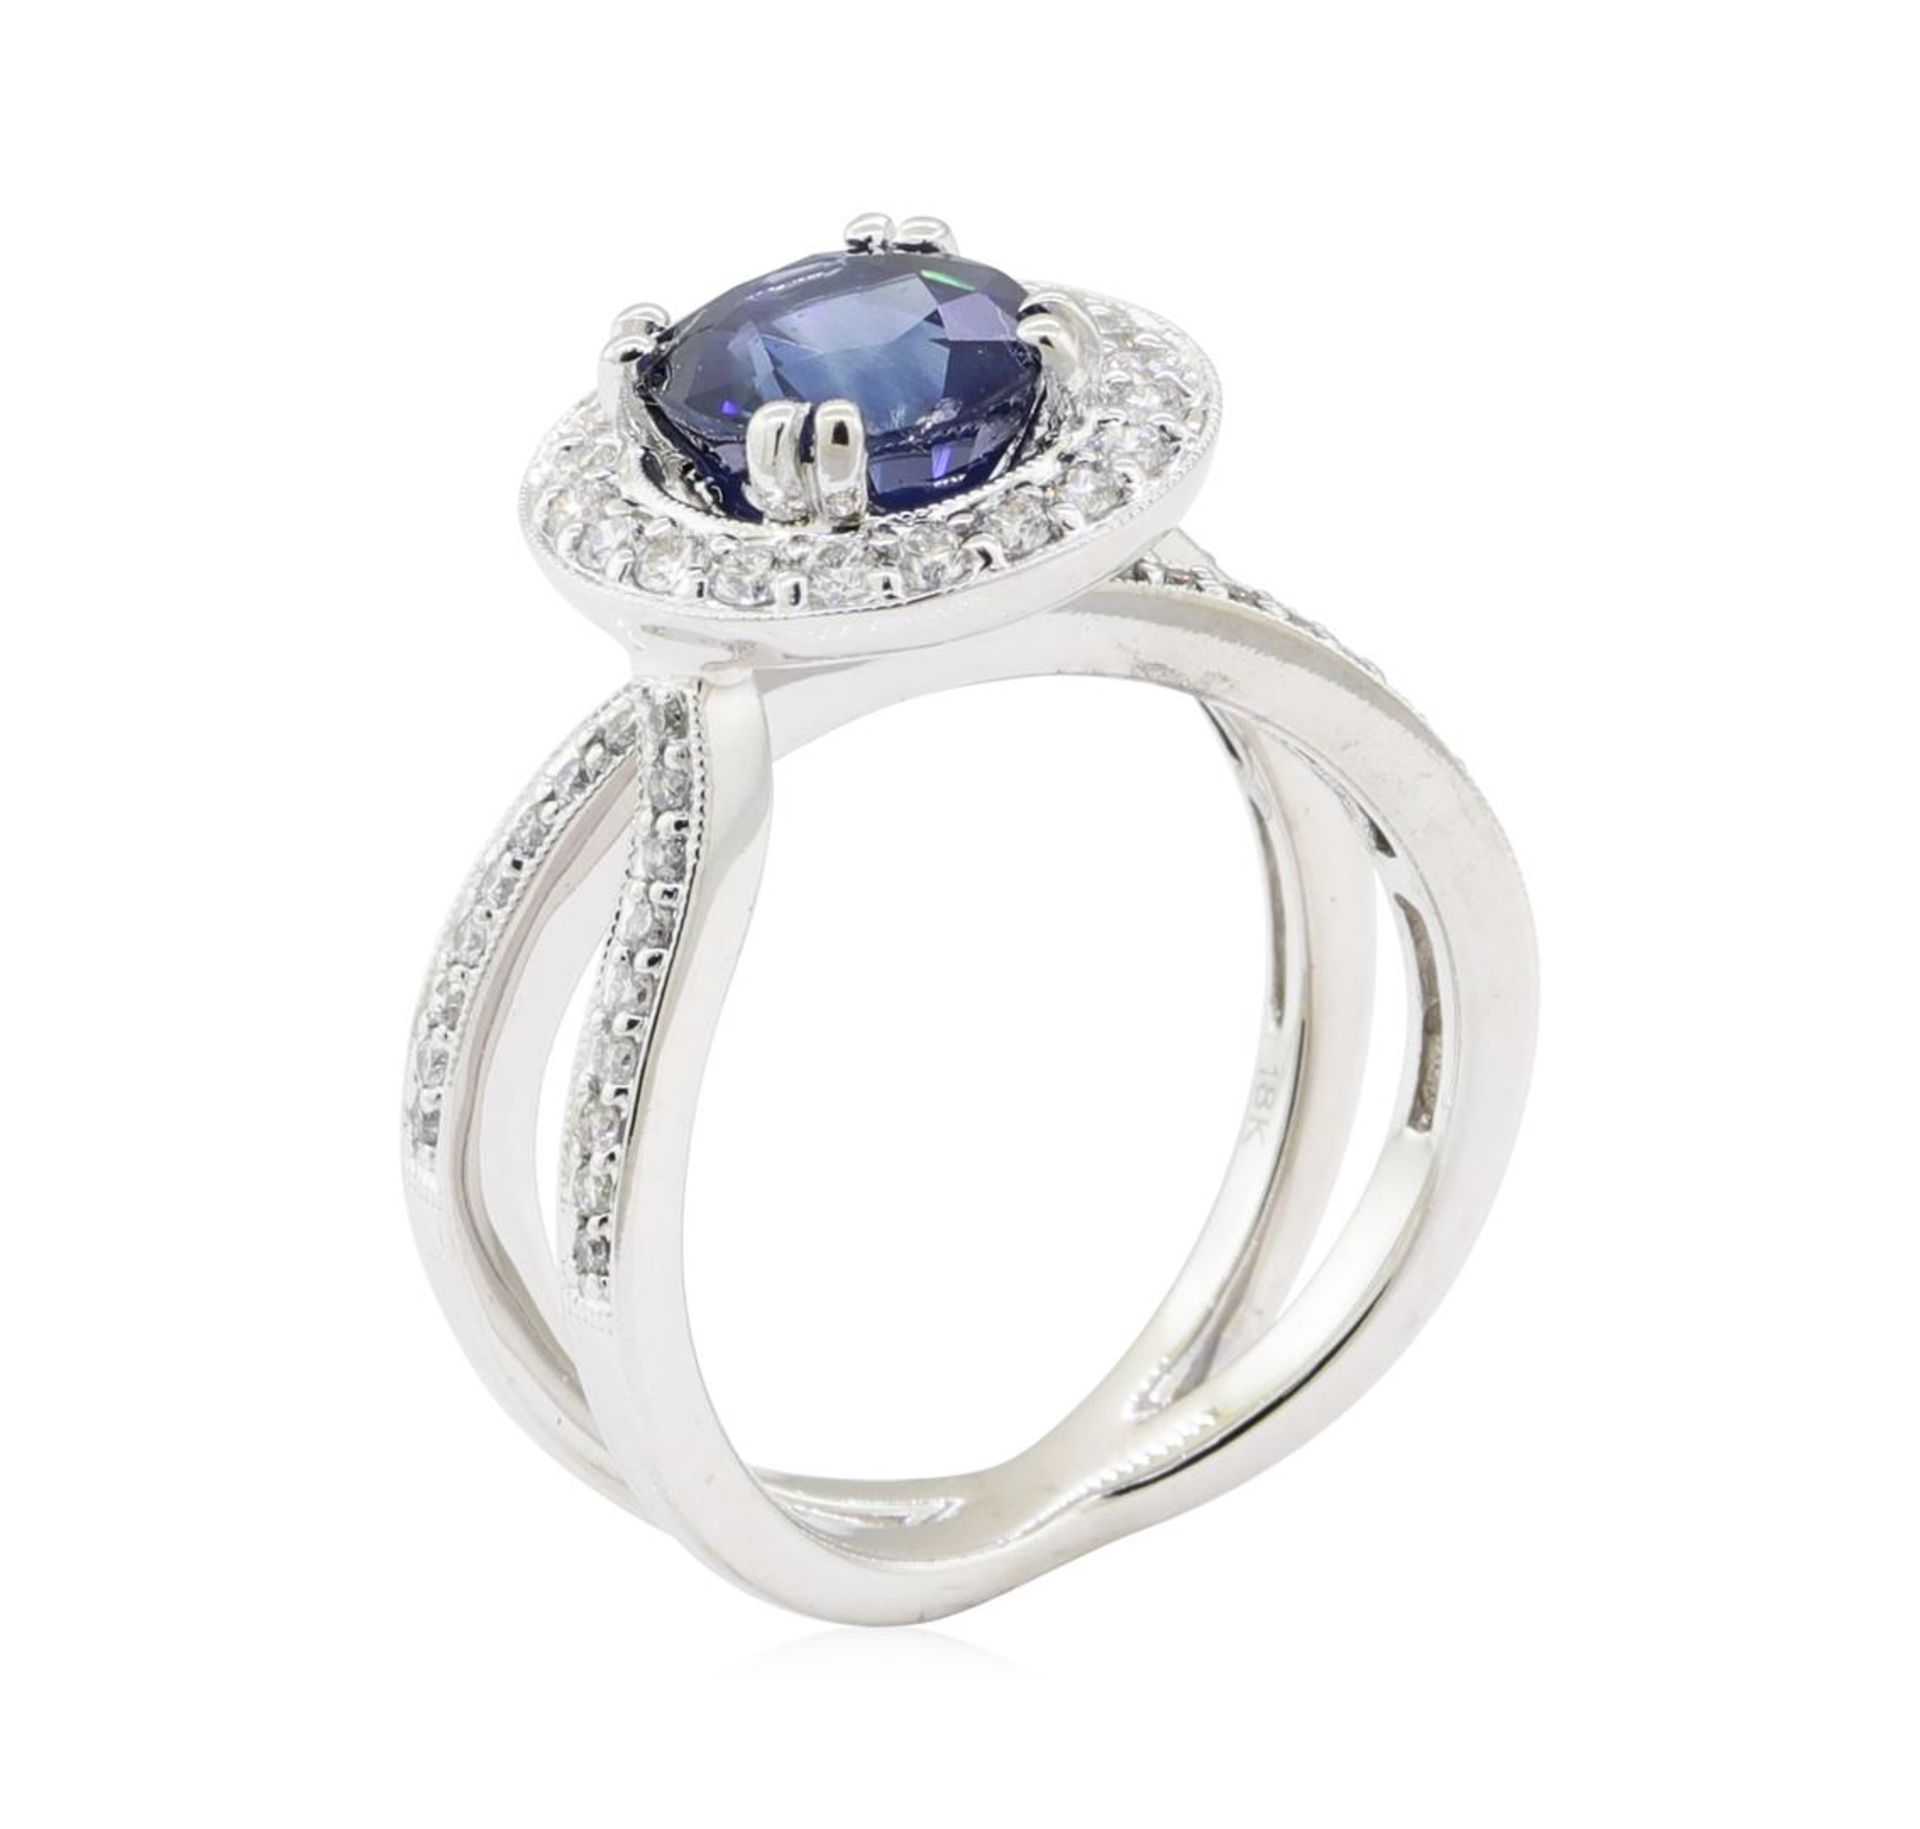 2.69 ctw Sapphire and Diamond Ring - 18KT White Gold - Image 4 of 5